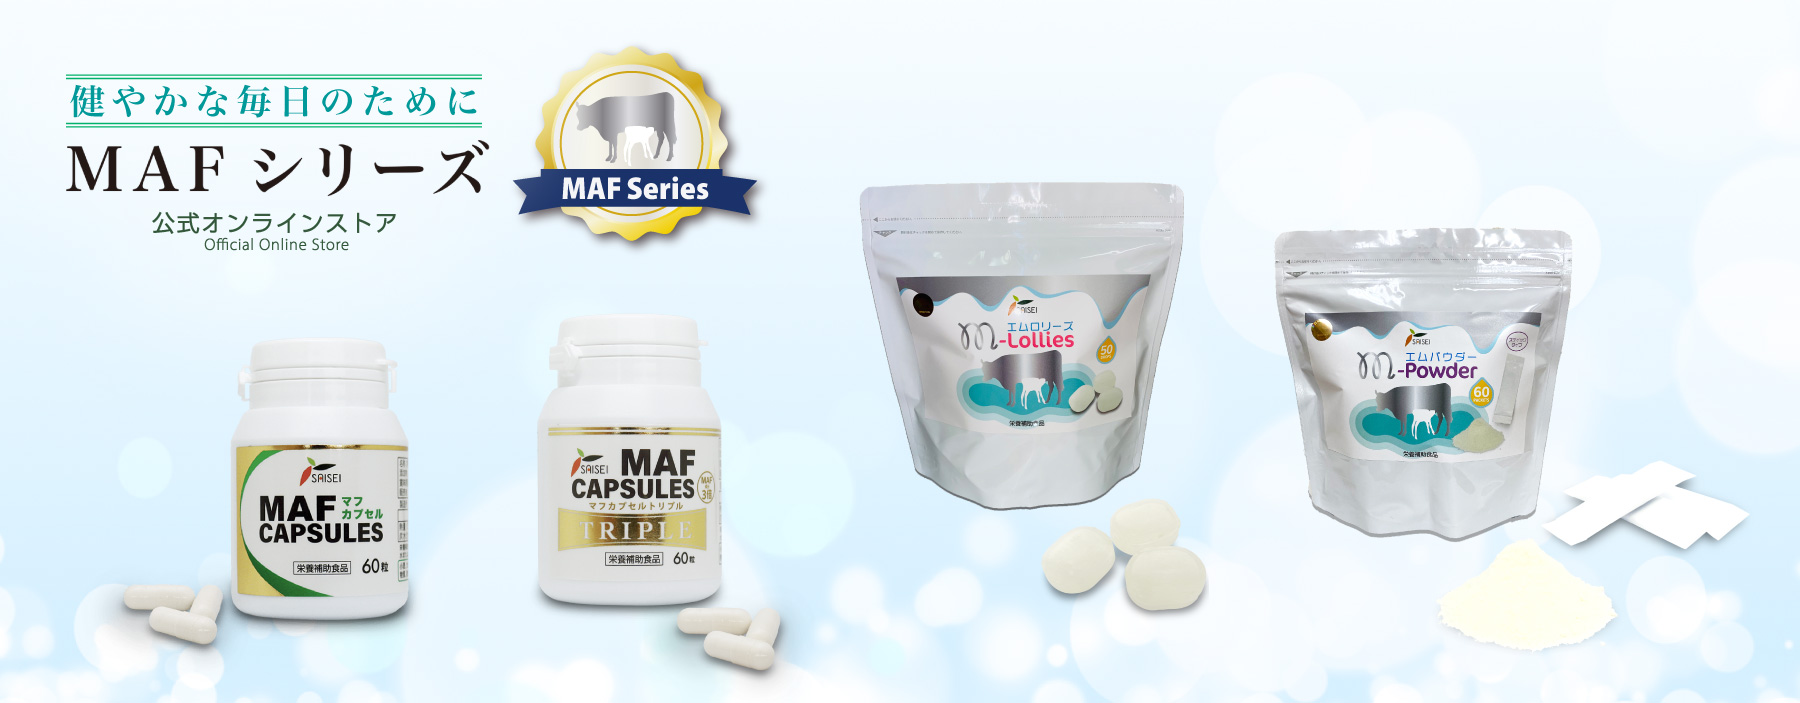 GcMAF & MAF Series Store - The Official Site of Heart Pharmacy